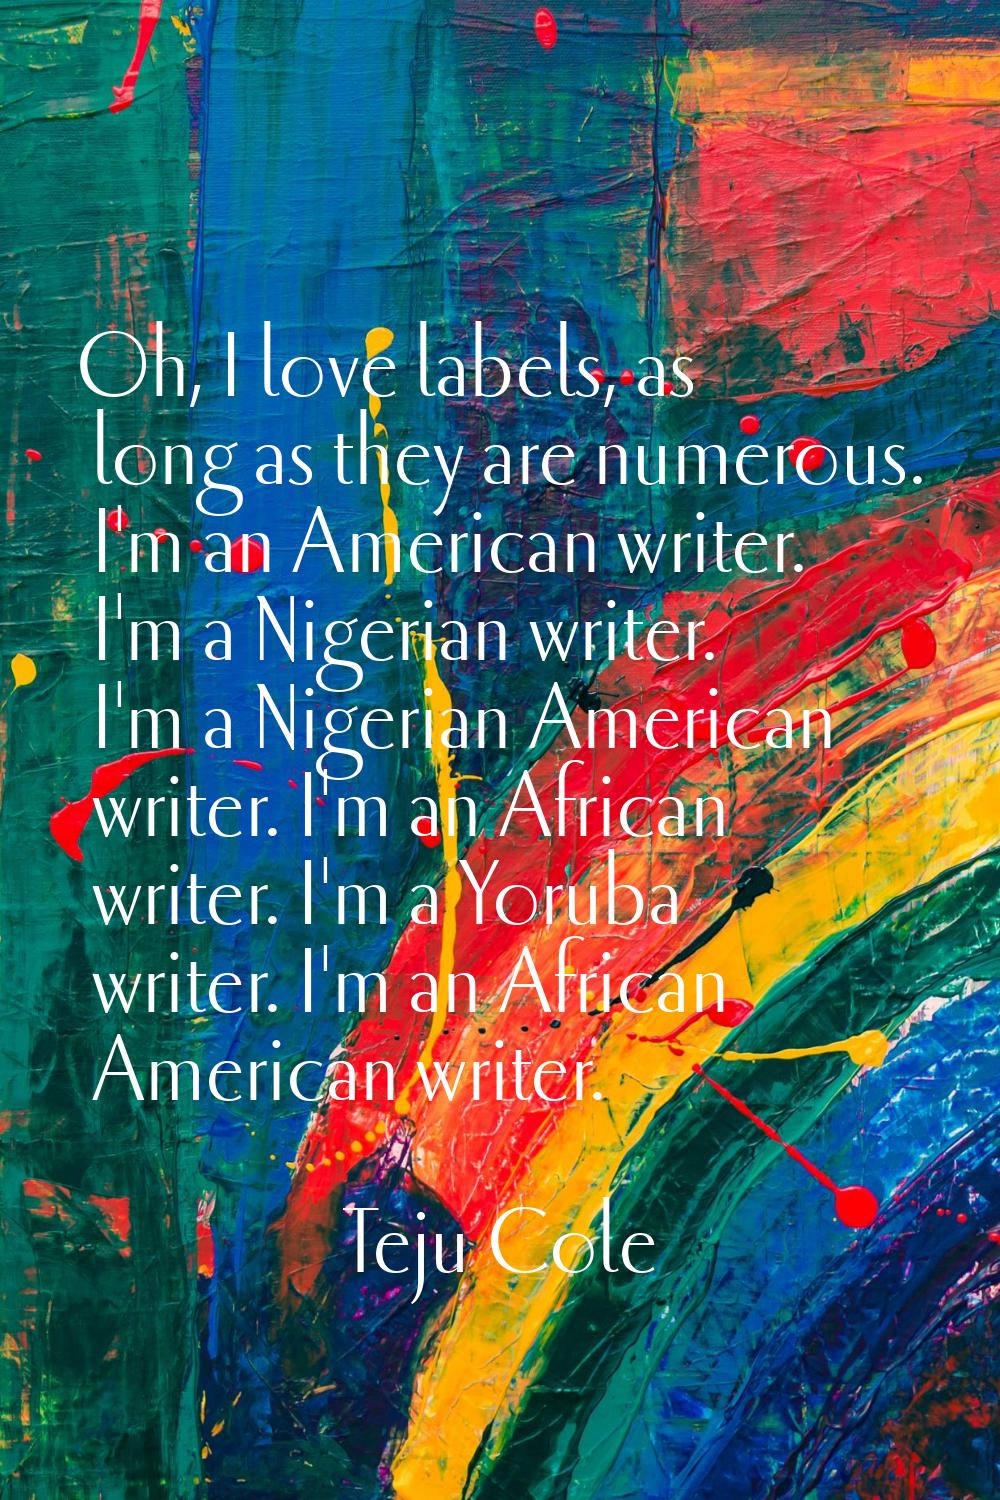 Oh, I love labels, as long as they are numerous. I'm an American writer. I'm a Nigerian writer. I'm